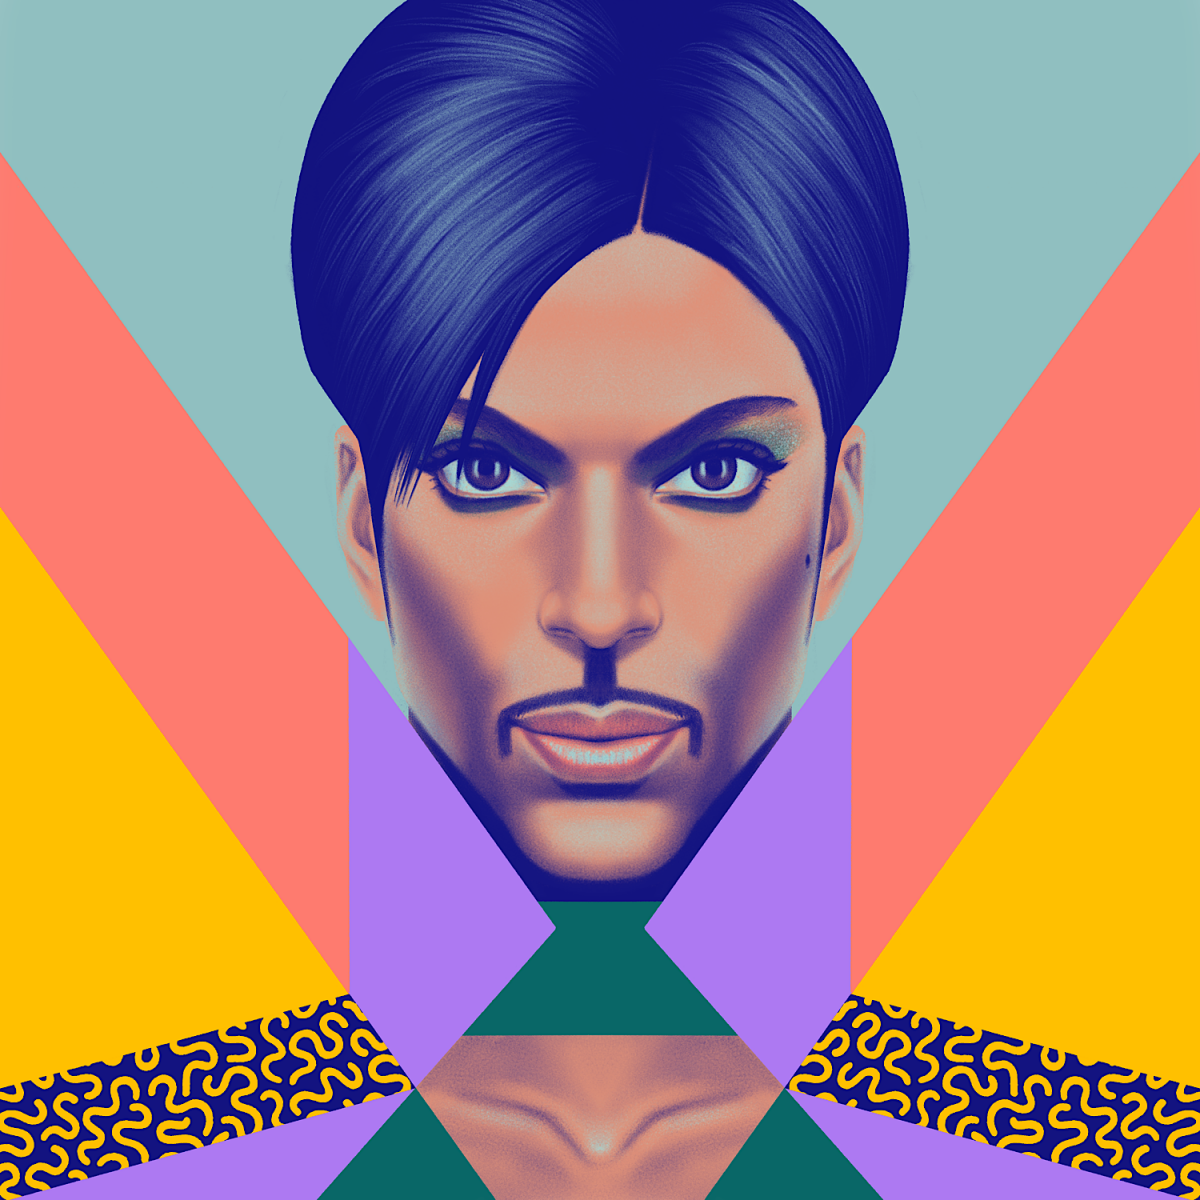 Unique and colorful portrait poster of Prince in Los Angeles printed on high quality art paper